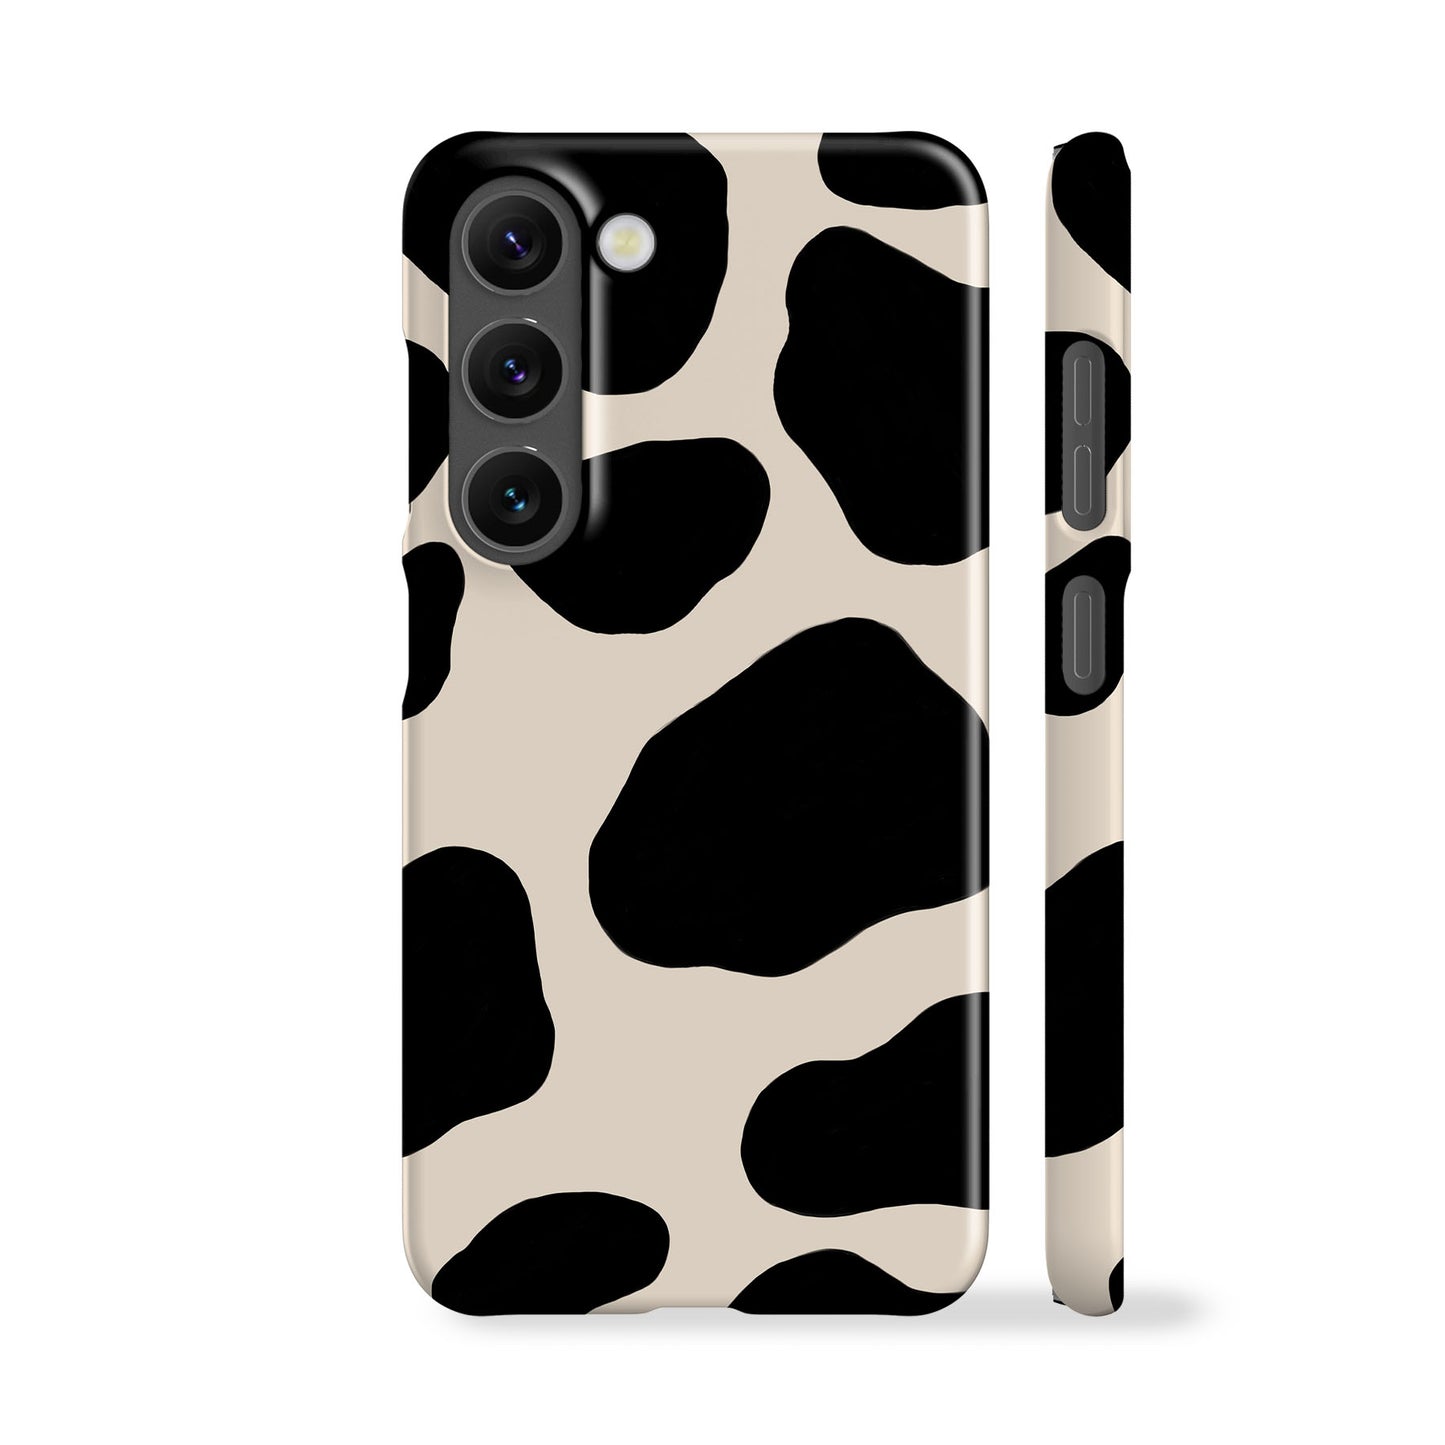 a phone case with a black and white cow pattern